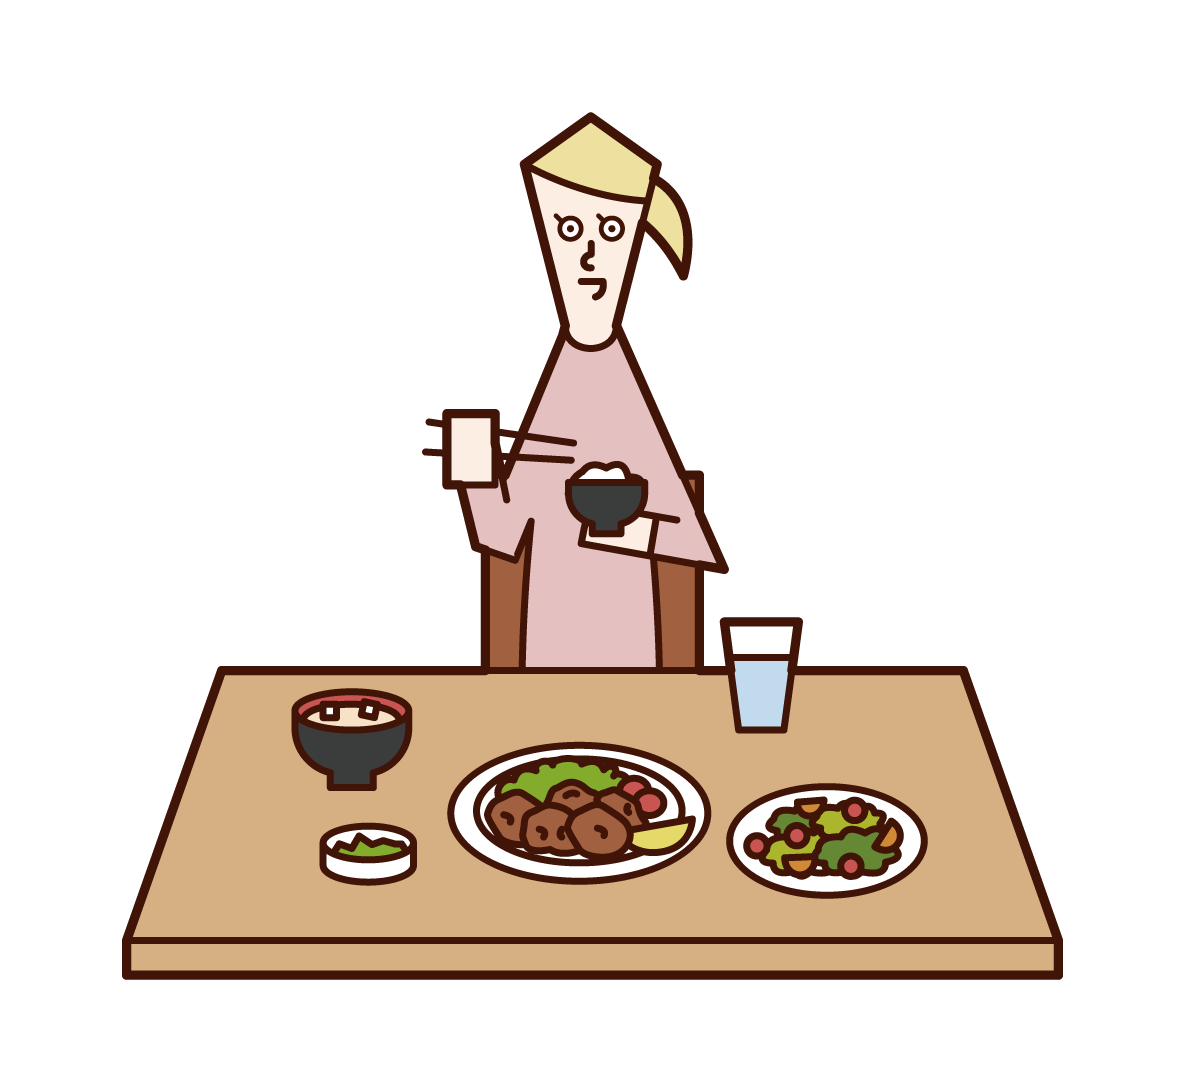 Illustration of a person (woman) eating